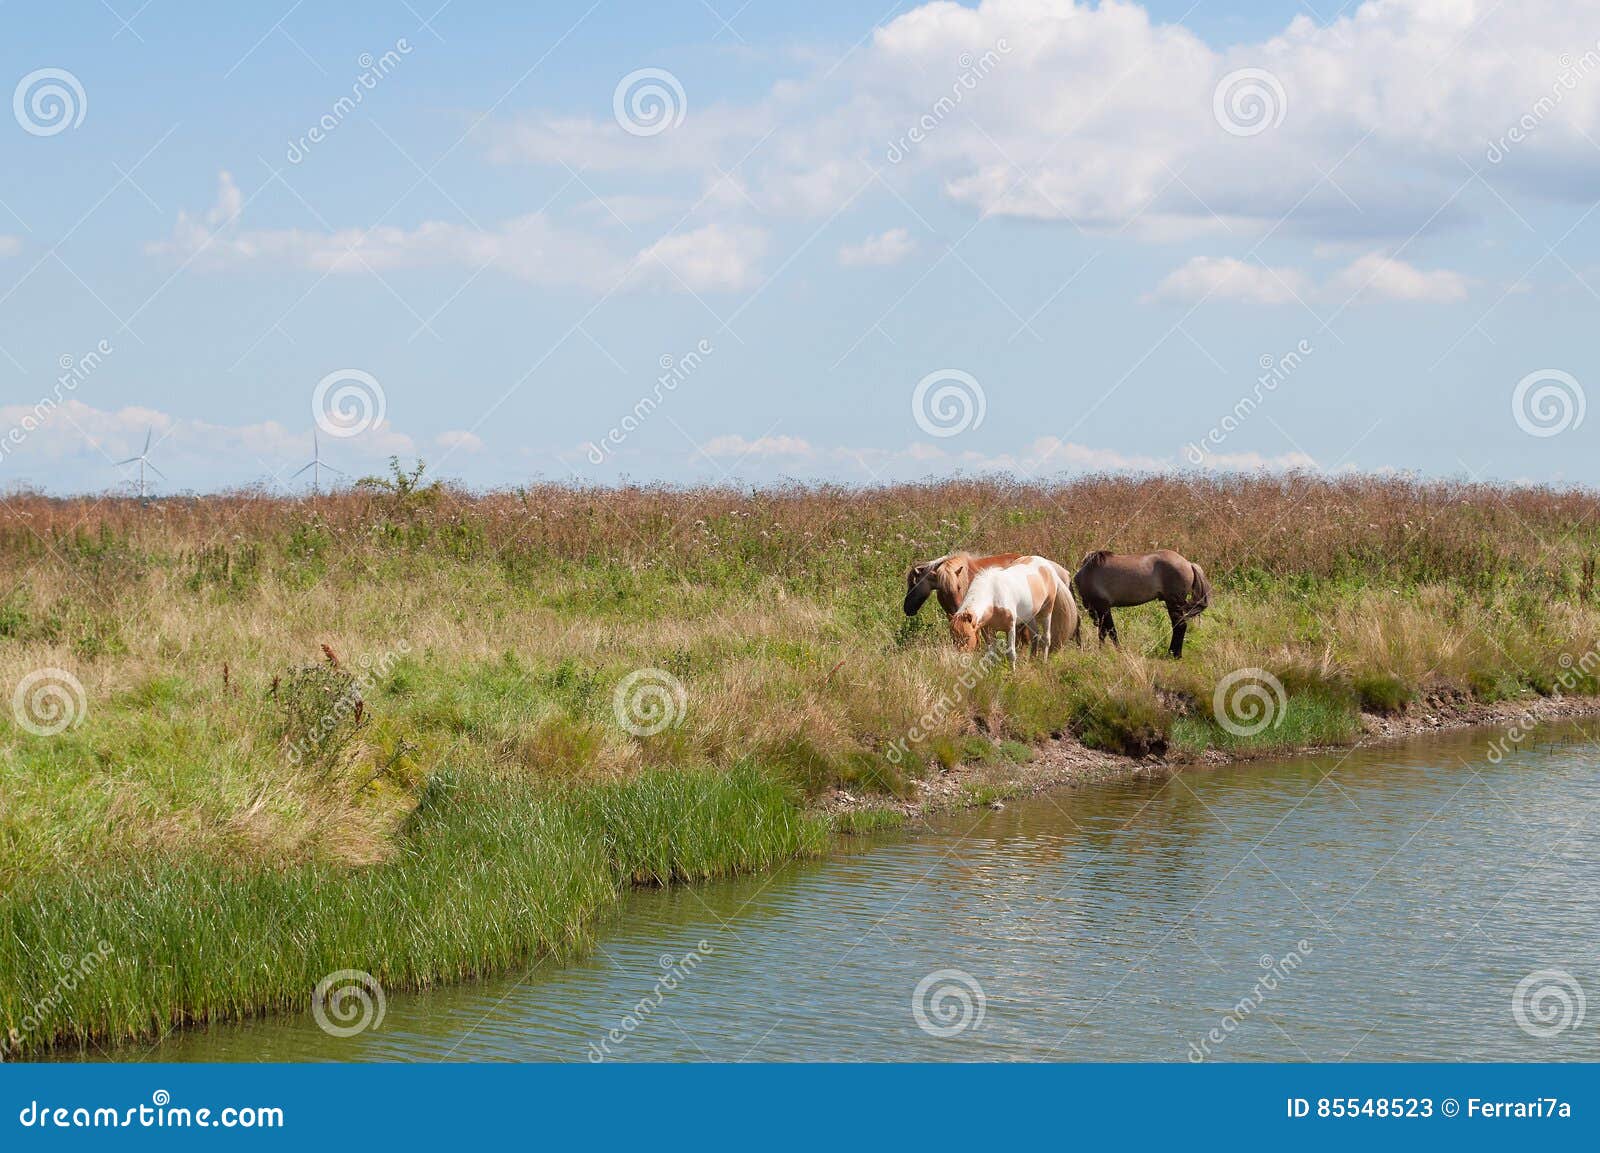 horses by the water